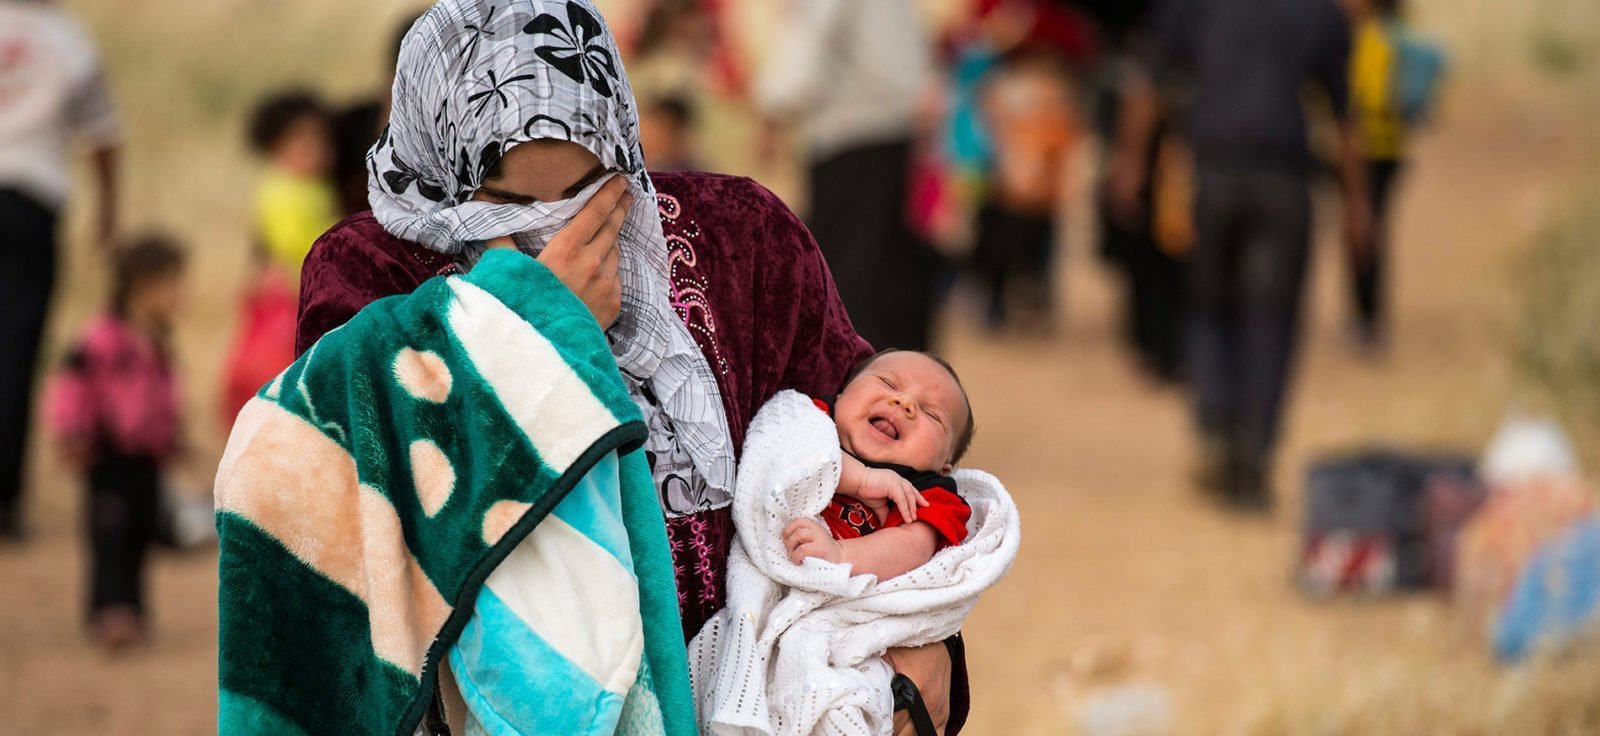 A young mother and refugee carries her baby in search of a safe home